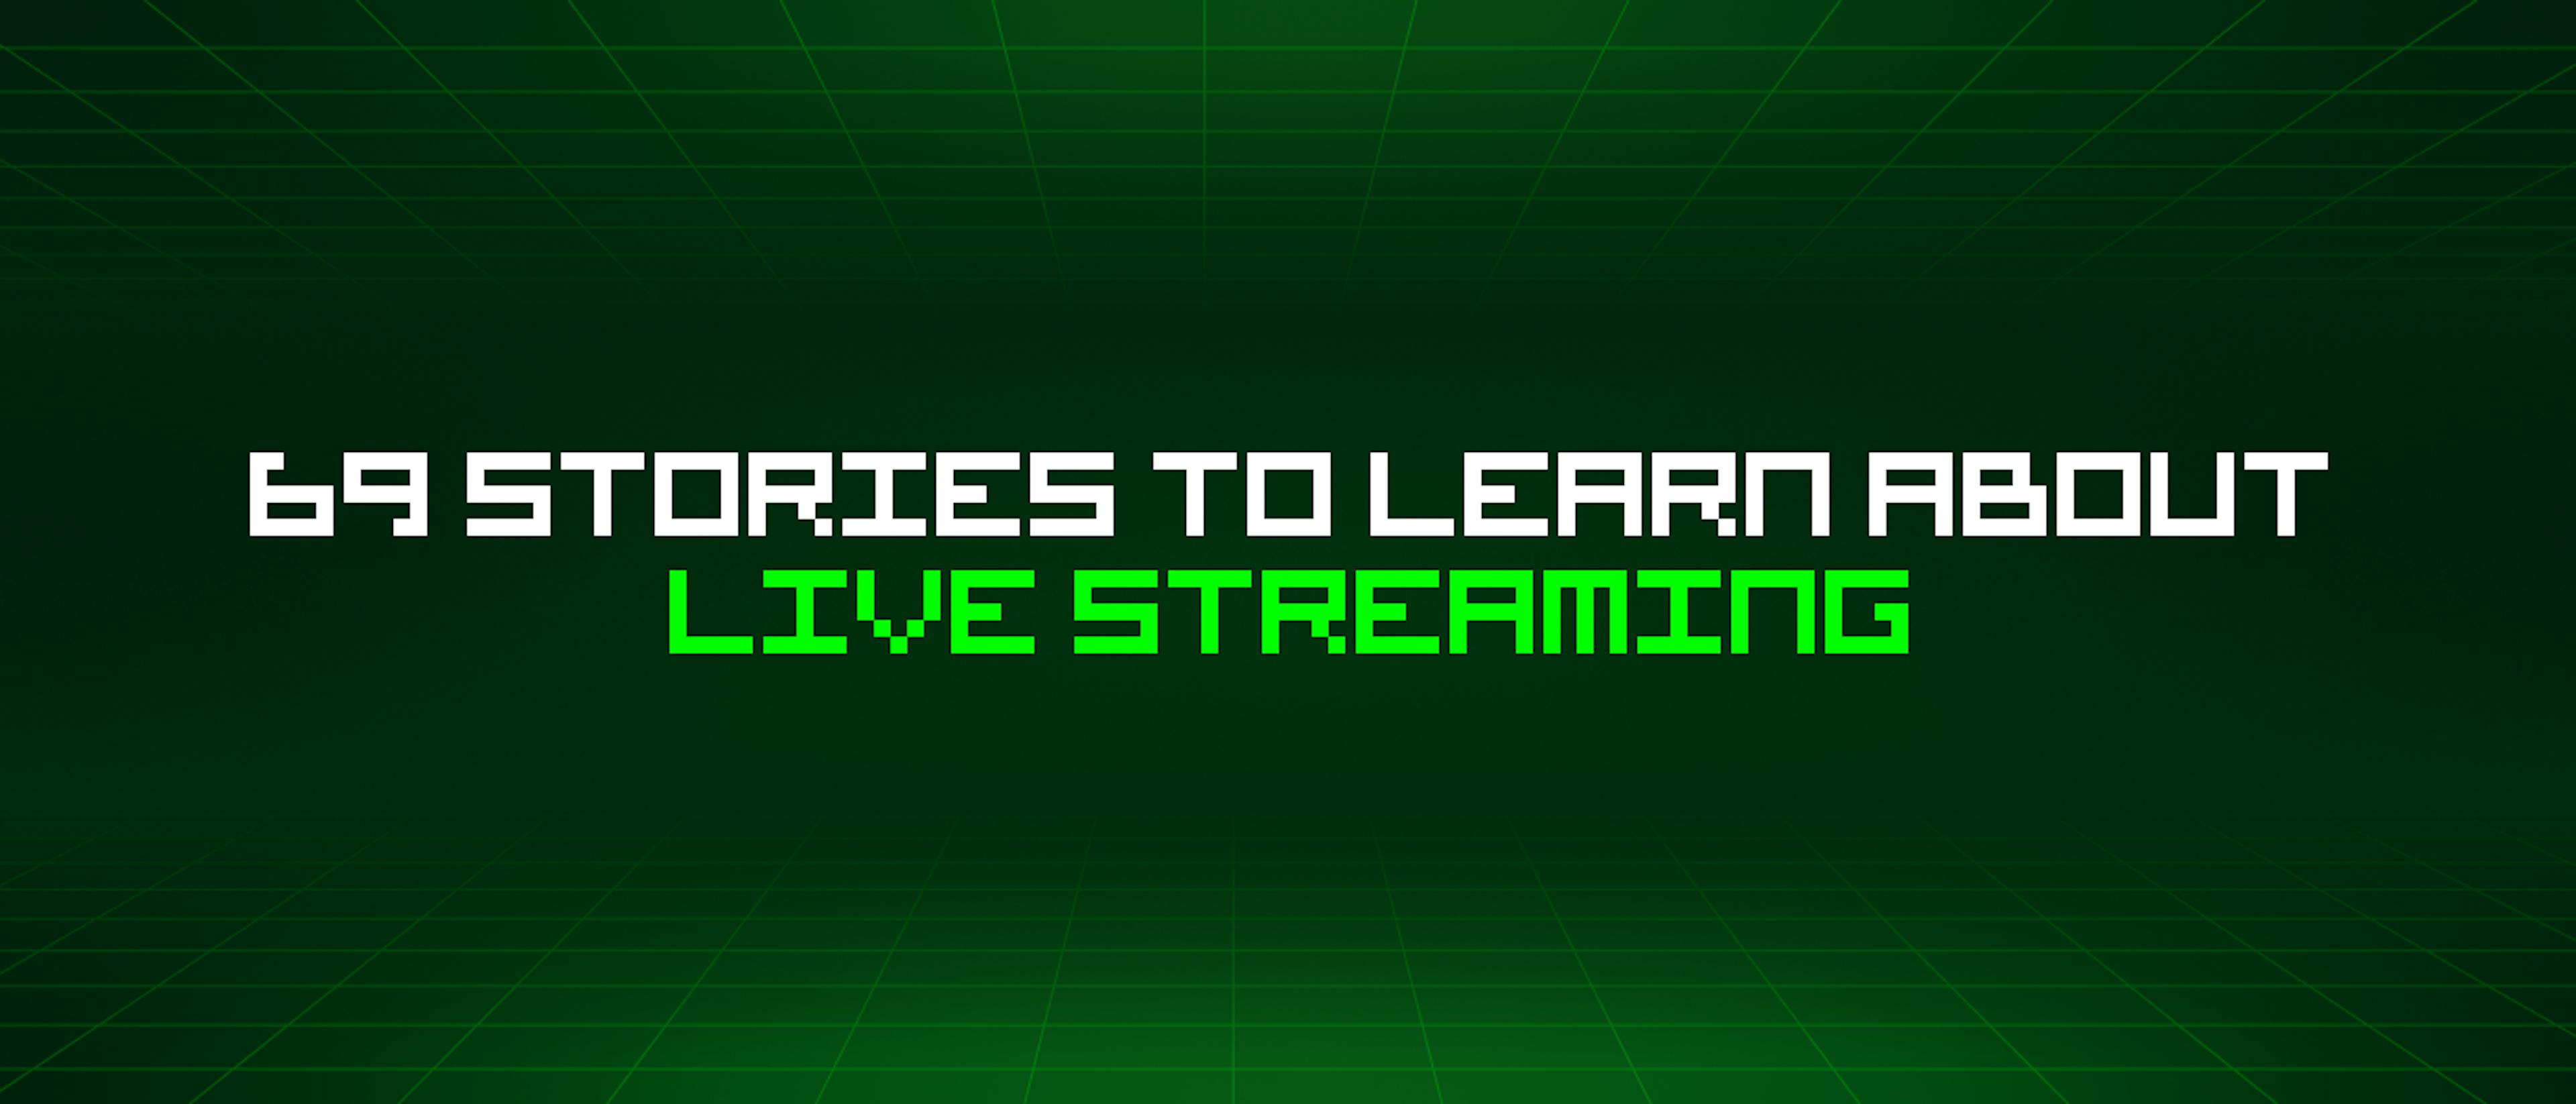 featured image - 69 Stories To Learn About Live Streaming